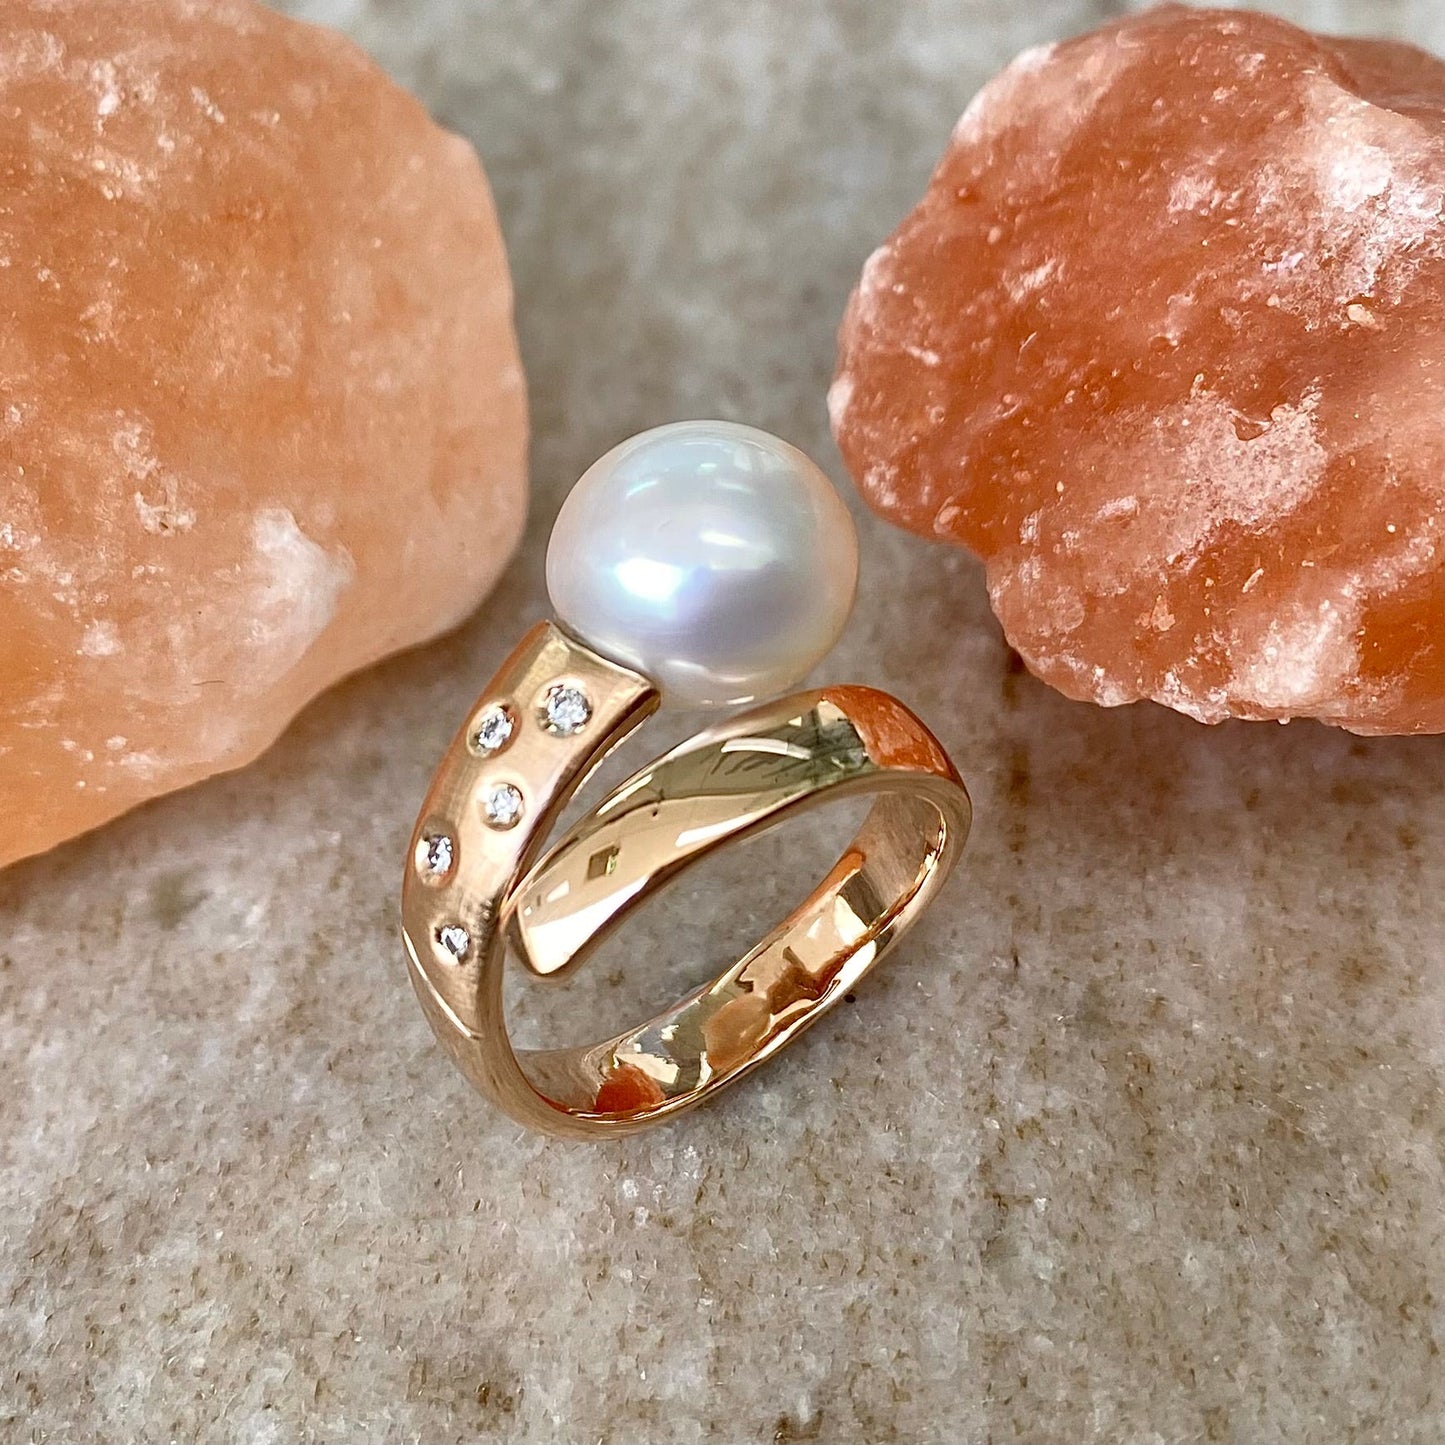 Pearl Creations. Jaffa Ring with South Sea Pearl and Diamonds